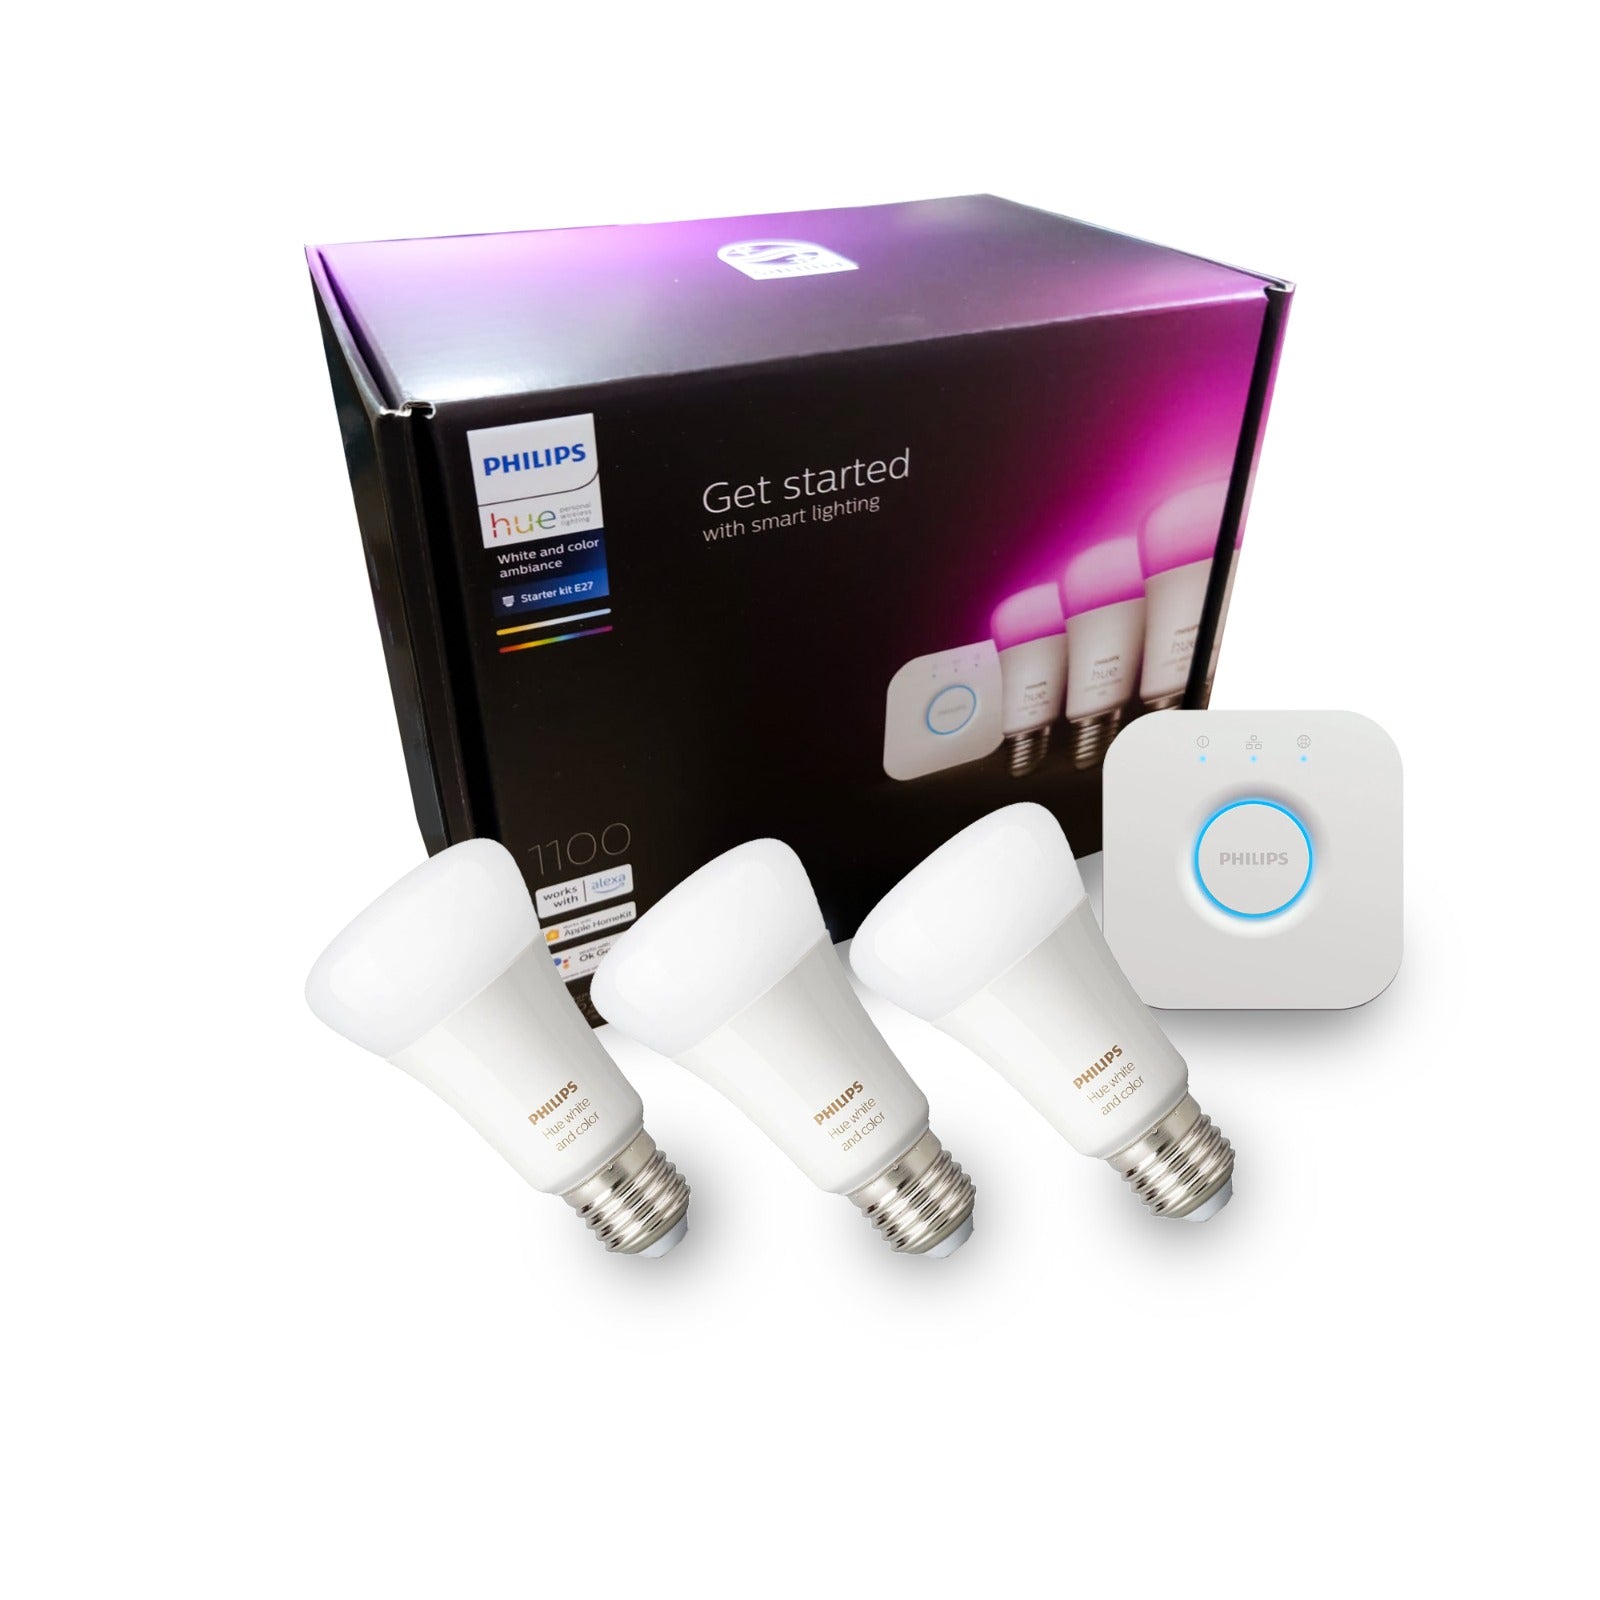 Philips Hue White and Color Starter Kit with Bulb 11W A60 E27 | Smart Home – Zenox